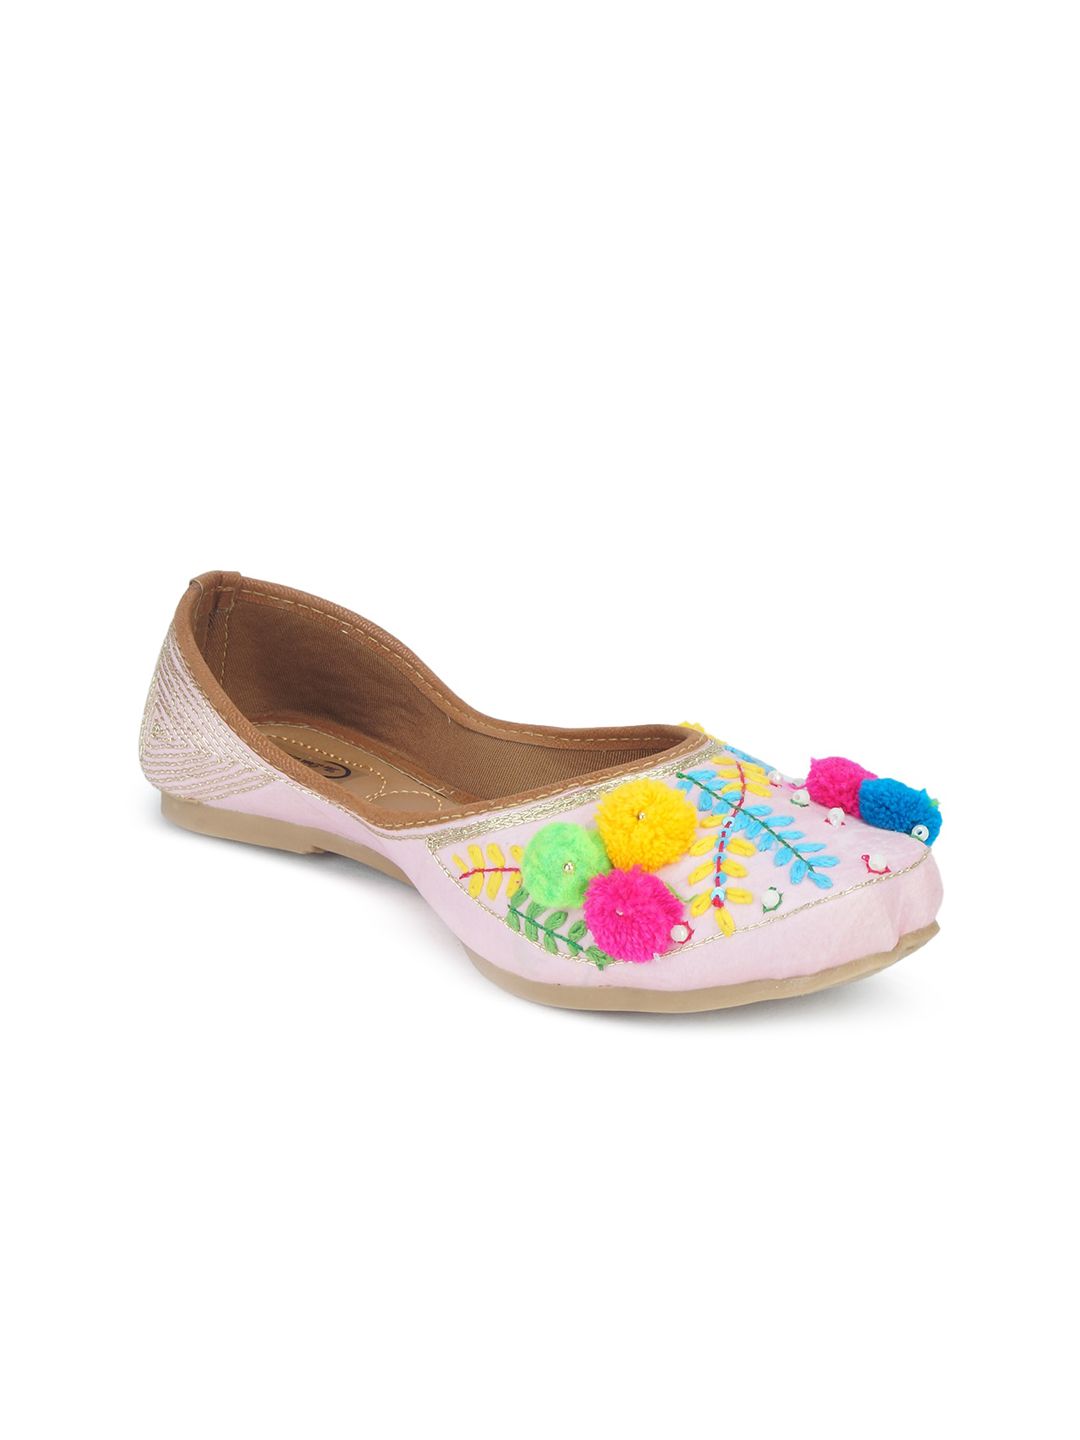 The Desi Dulhan Women Pink Printed Leather Party Mojaris Flats Price in India